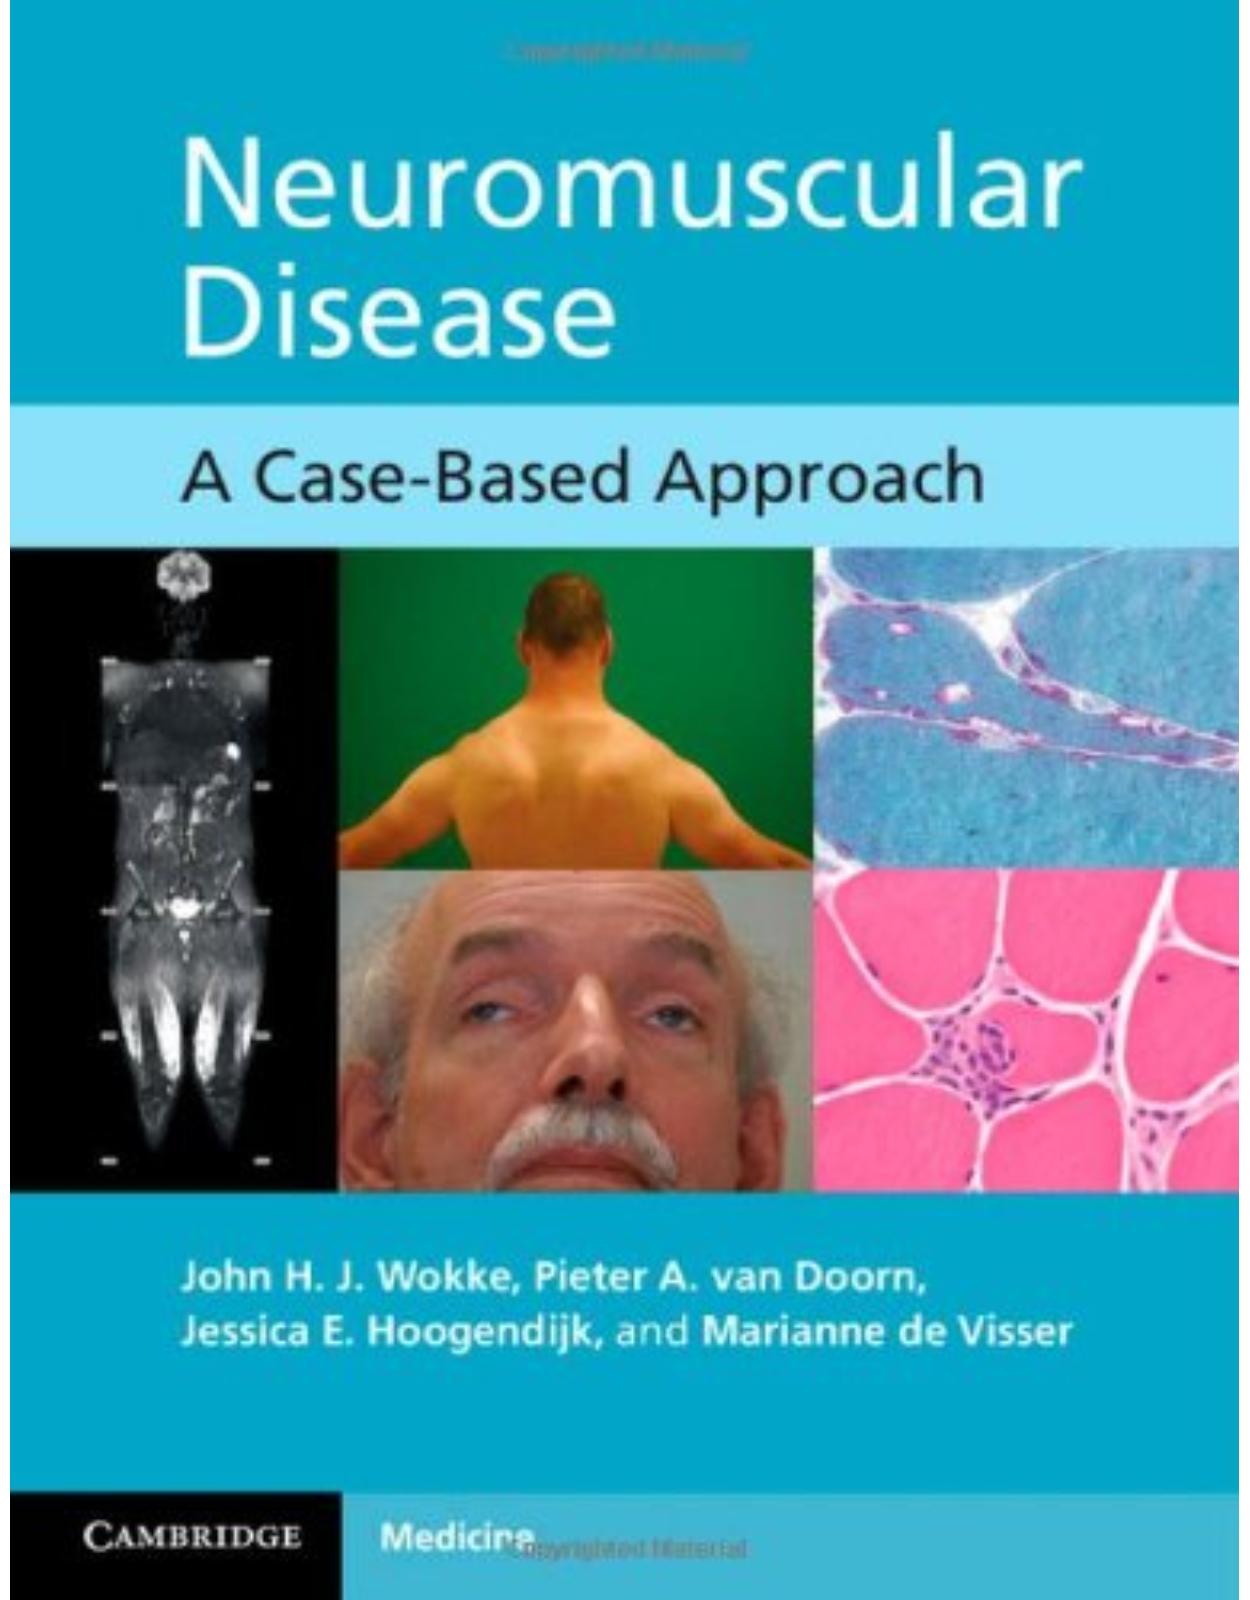 Neuromuscular Disease: A Case-Based Approach